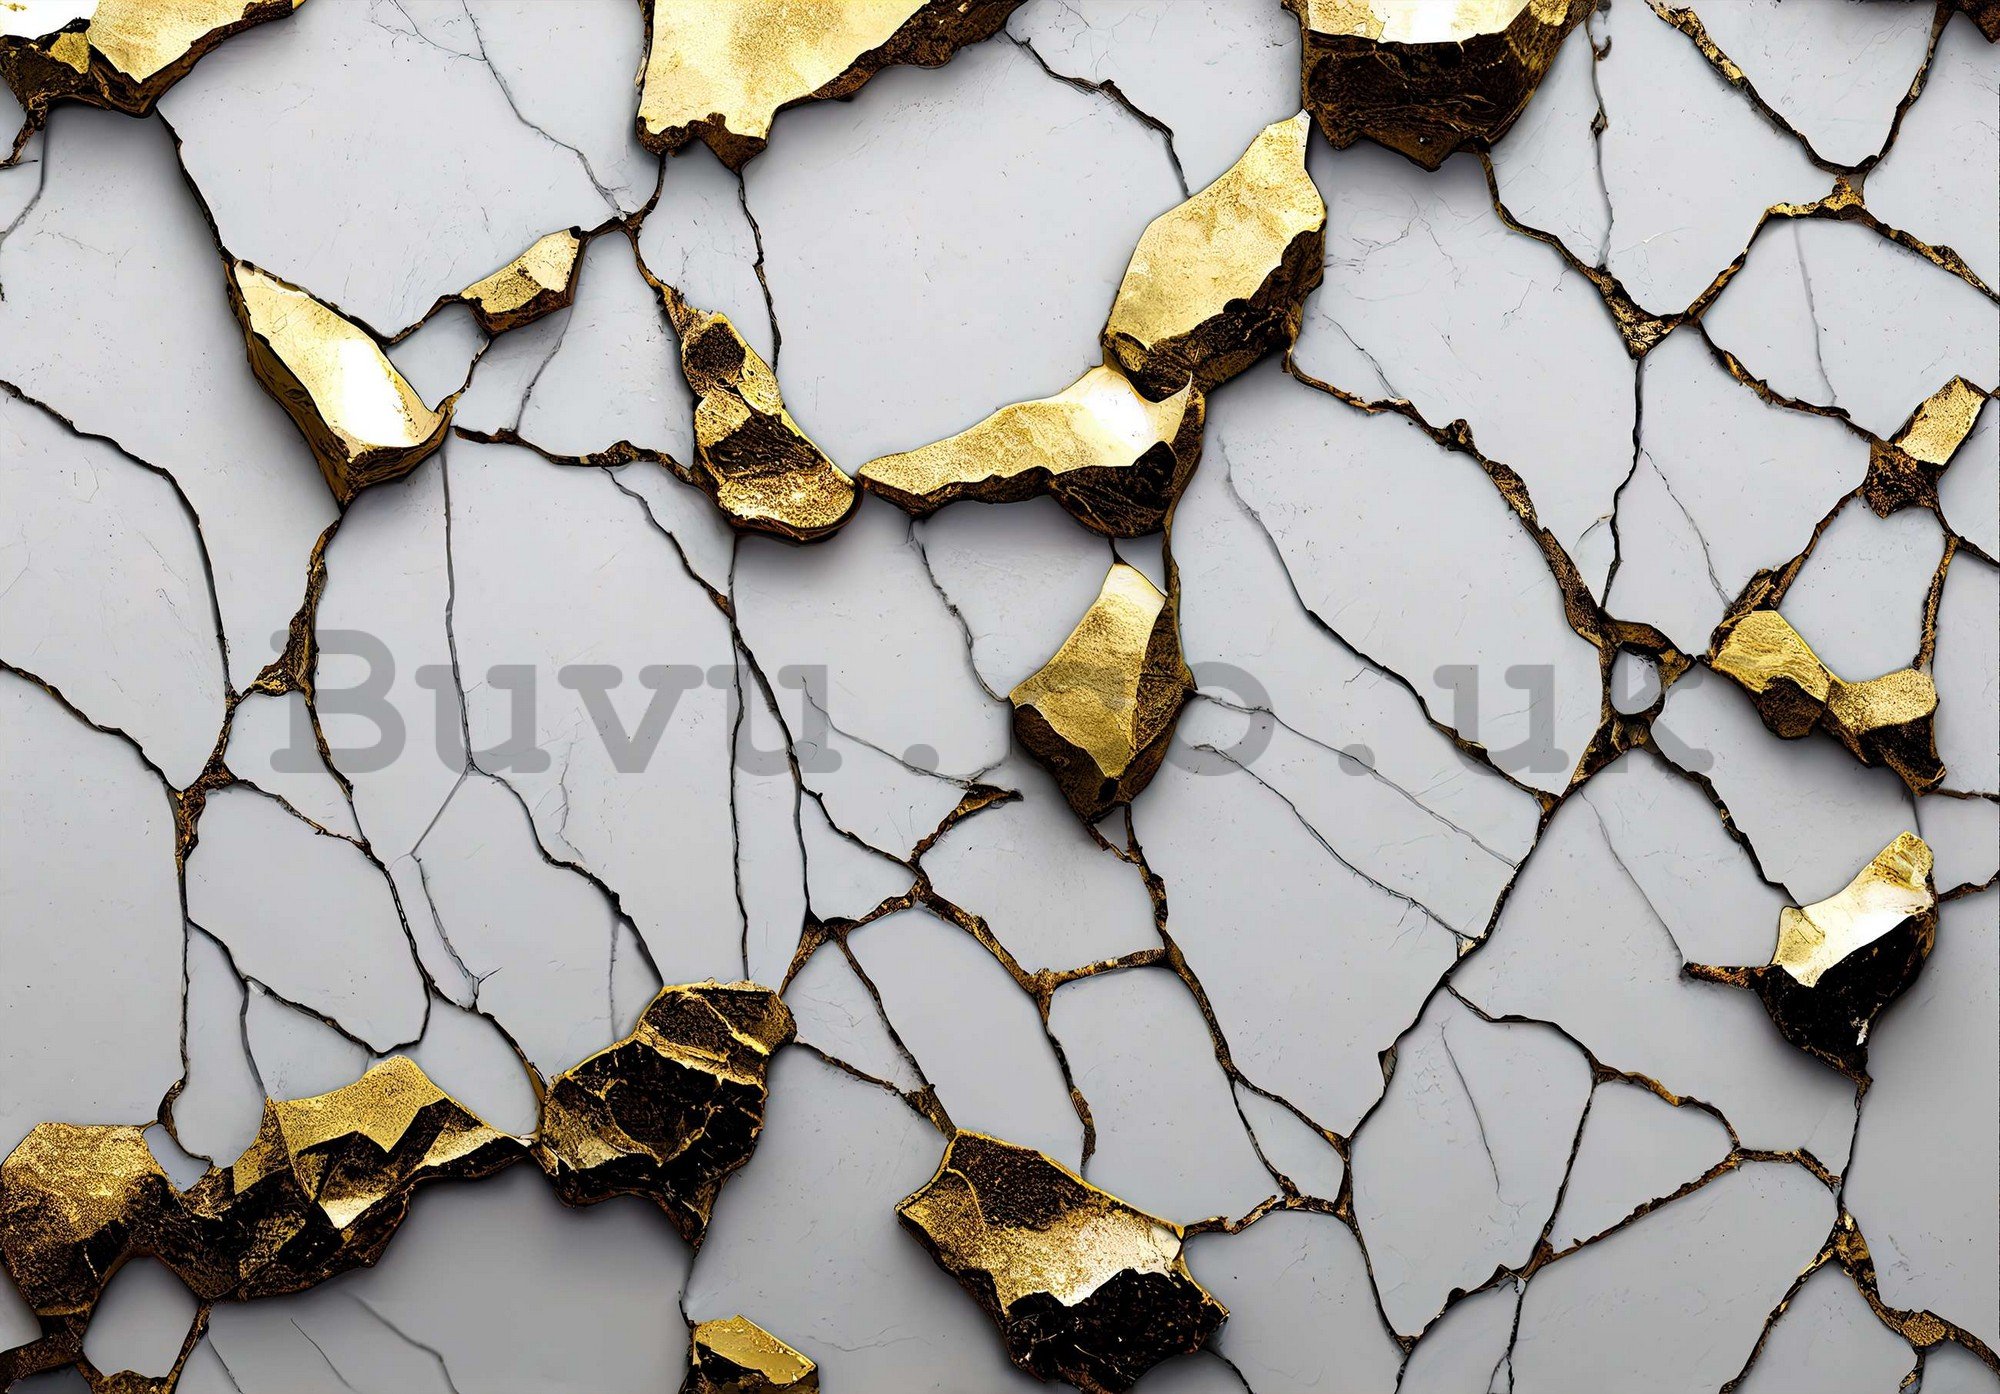 Wall mural vlies: Glamor imitation of golden marble with a white wall - 368x254 cm